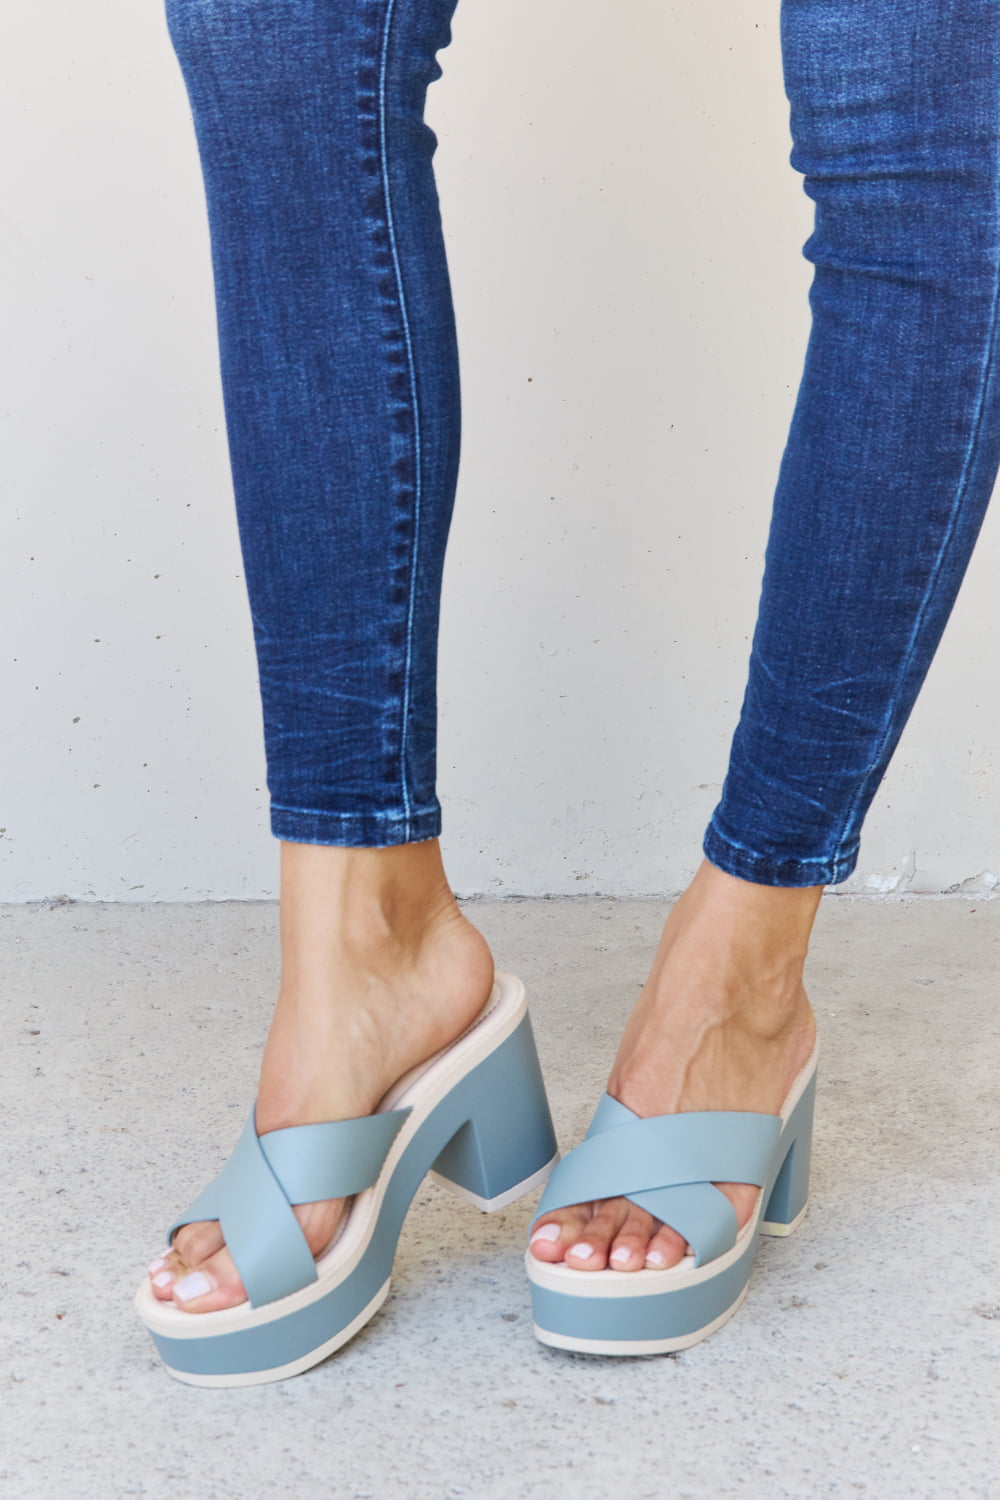 Weeboo Cherish The Moments Contrast Platform Sandals in Misty Blue - Thandynie